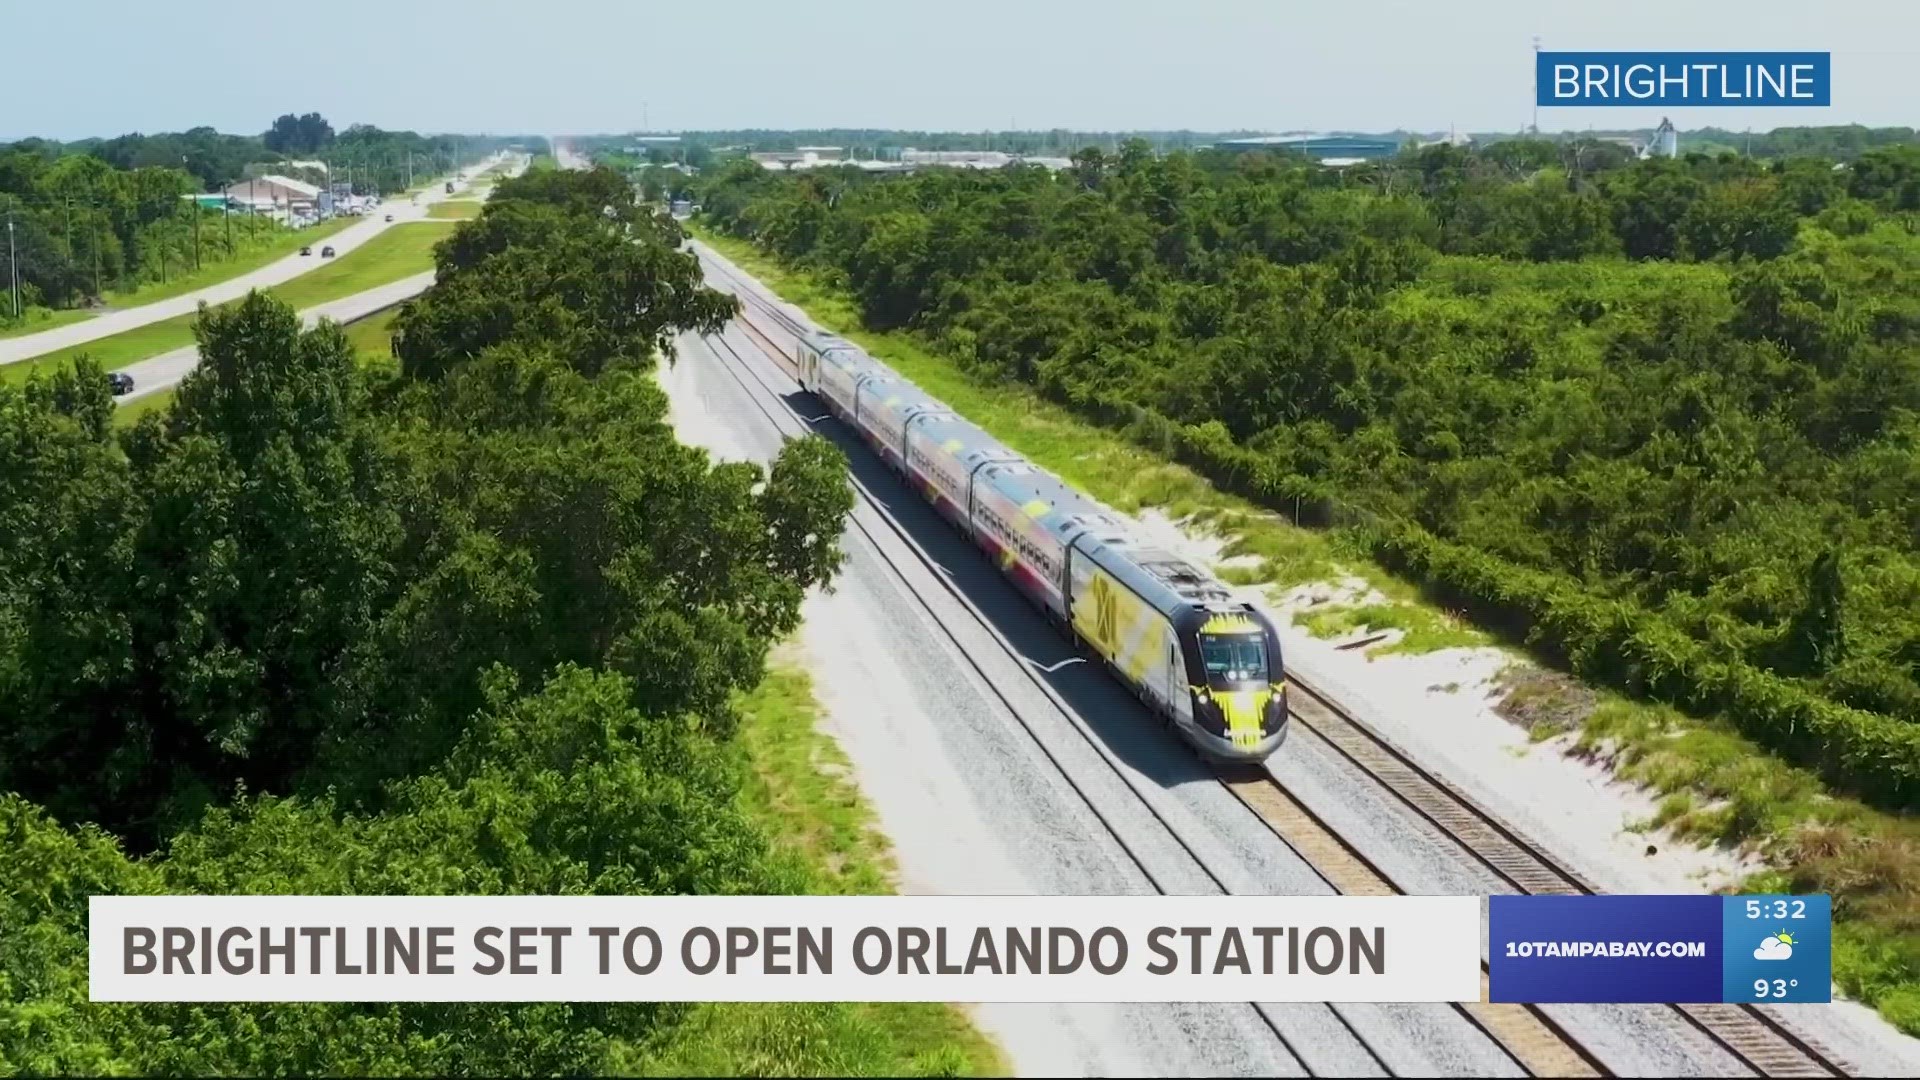 City of Tampa officials have previously said it will probably be a few years before we see a high-speed train in the Tampa Bay area.